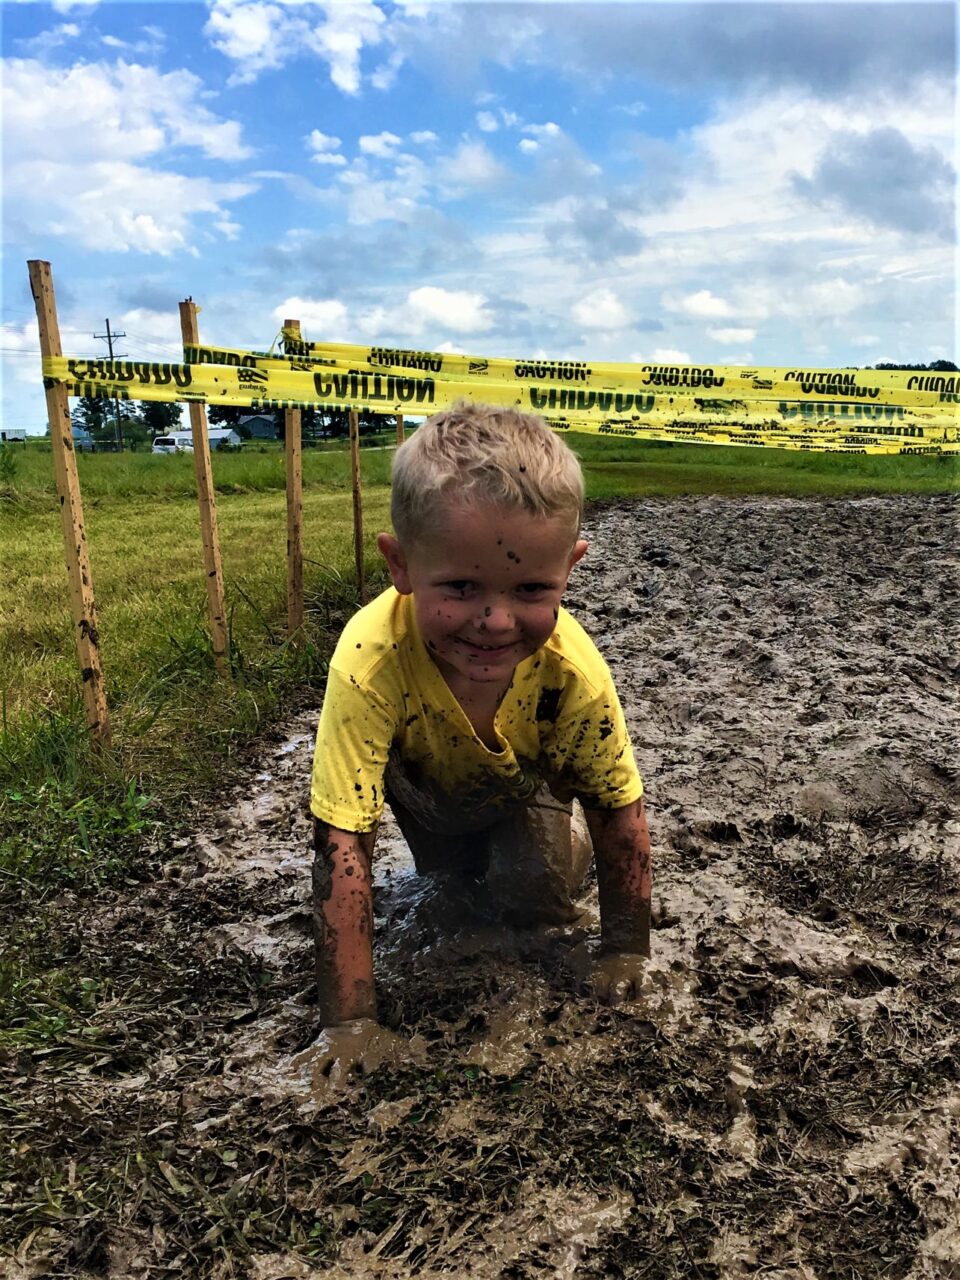 A photograph of a smiling child crawling through the mud, participating in the 'mud mile' at kirksville's family fun weekend